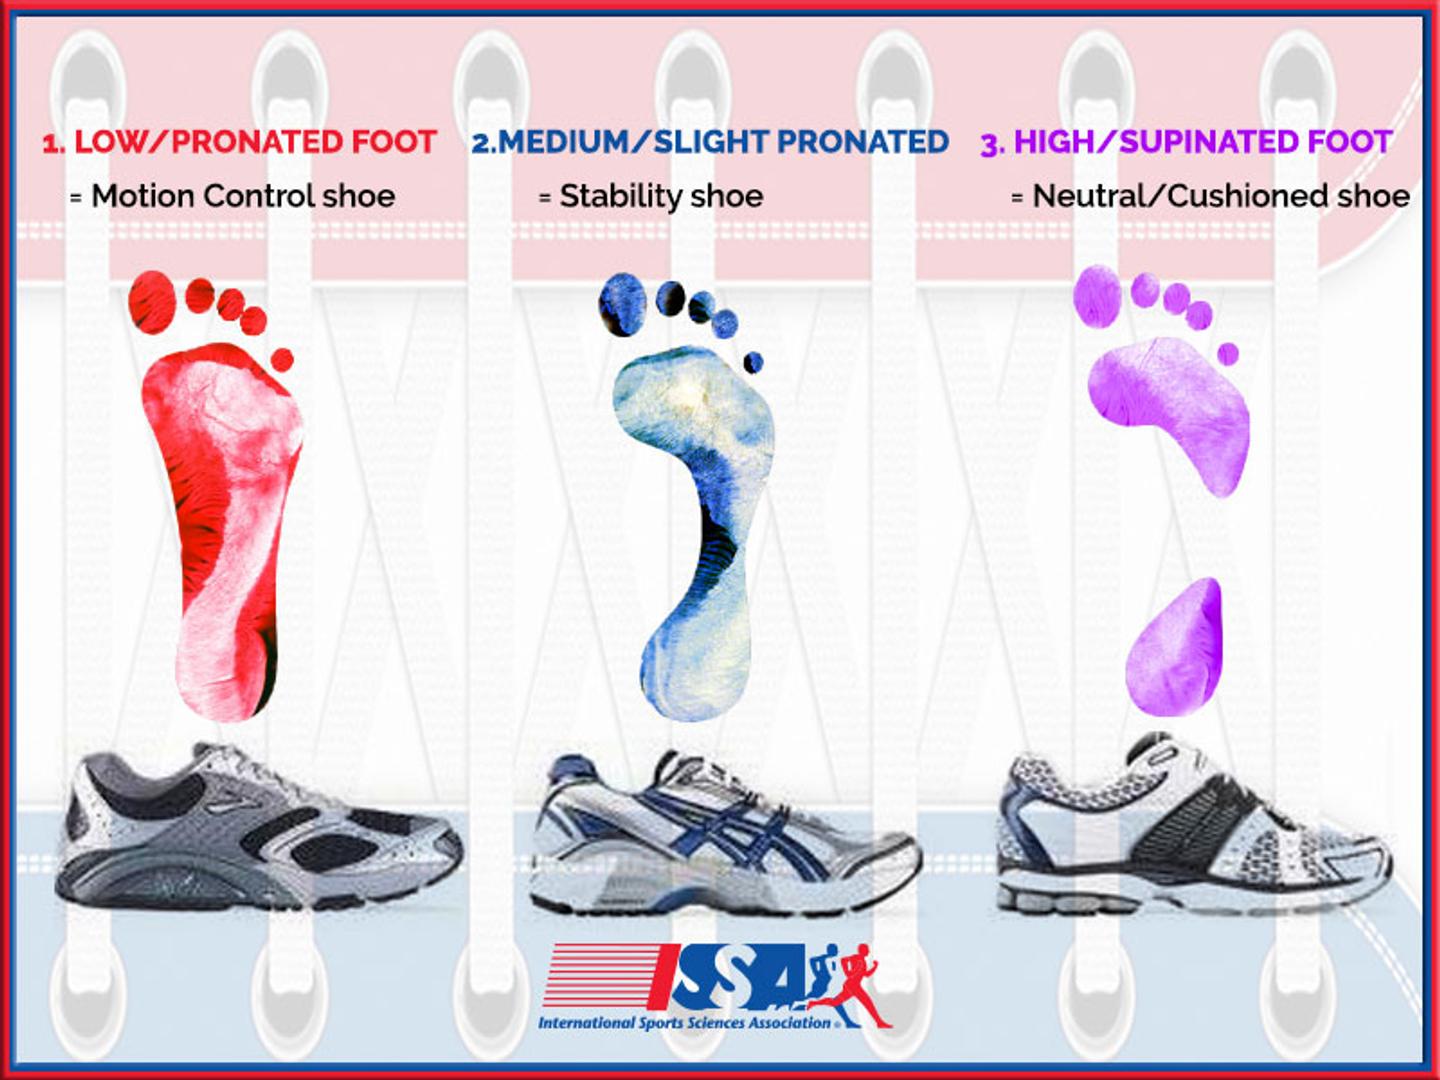 ISSA, International Sports Sciences Association, Certified Personal Trainer, ISSAonline, Debunk Shoe Myths, Running shoes typically come in three different categories: stability, neutral, and motion control (high stability).